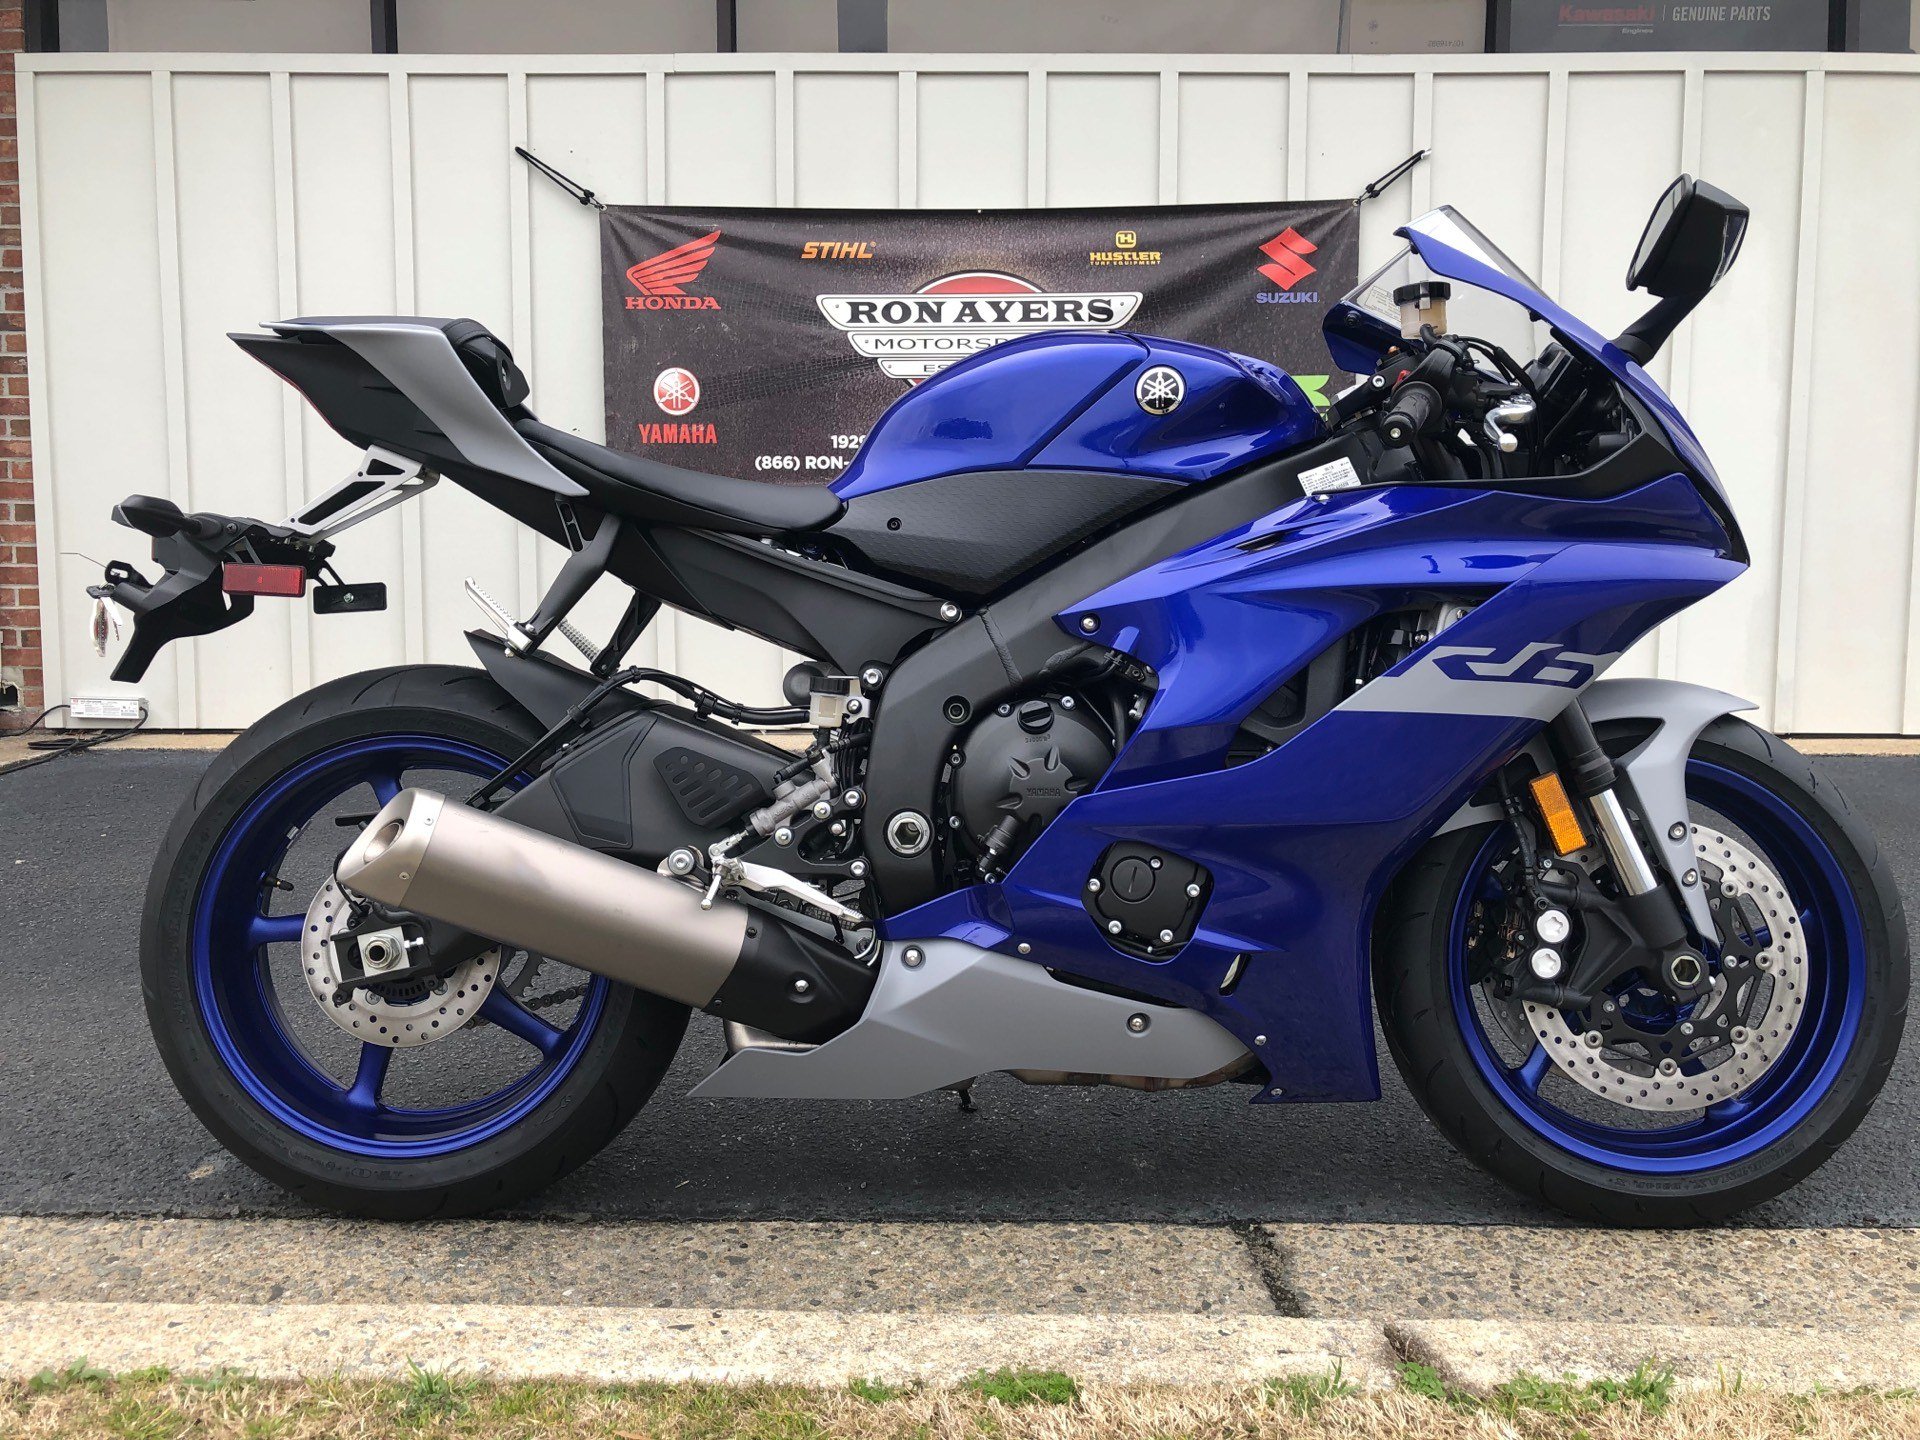 Price Of Yamaha R6 In India : Yamaha YZF-R6 to be discontinued